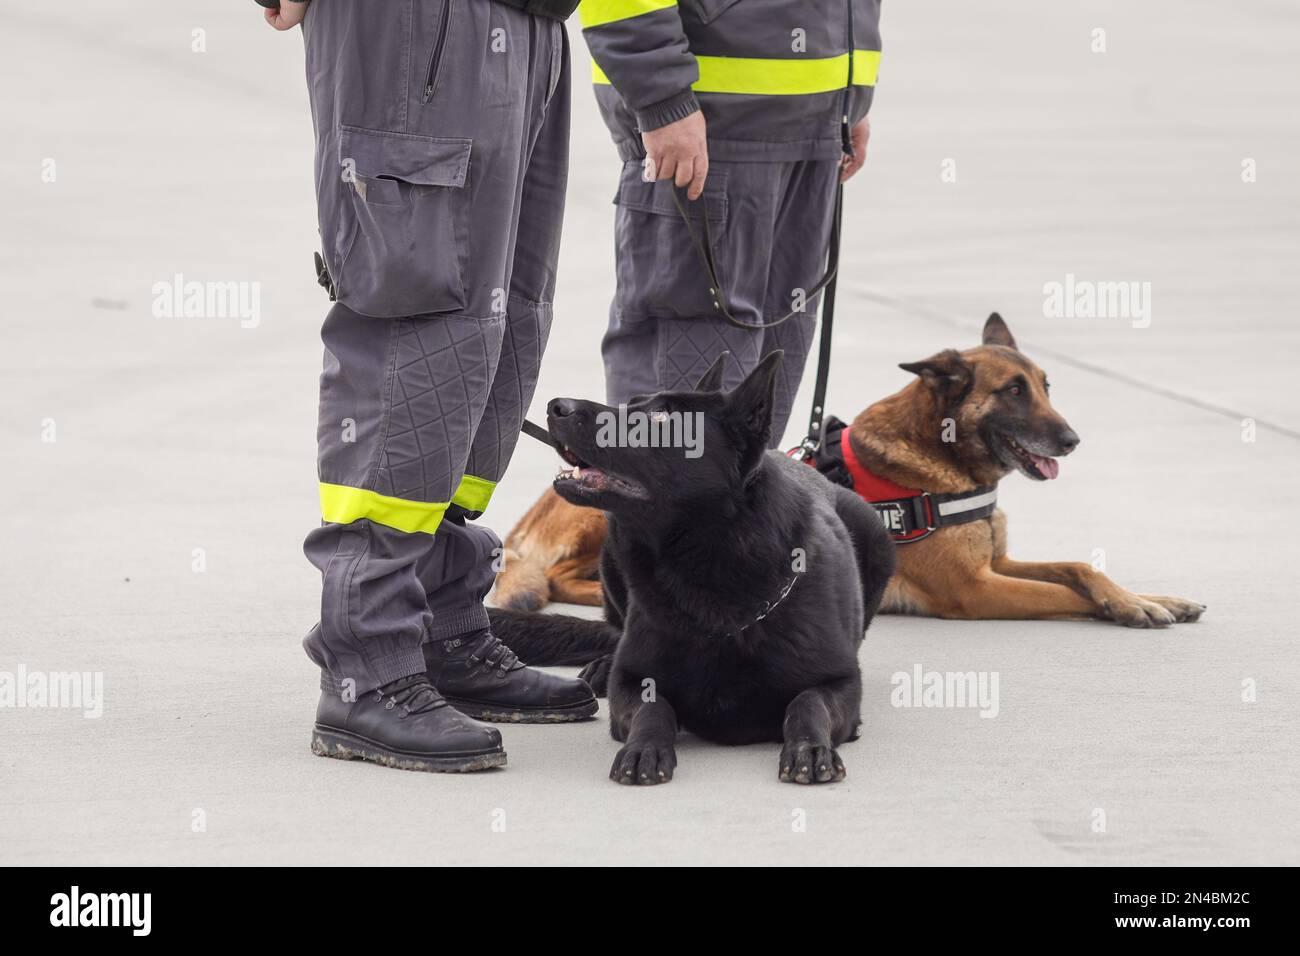 Rescue service dogs trained to detect victims of earthquakes and other disasters near his trainer. Stock Photo